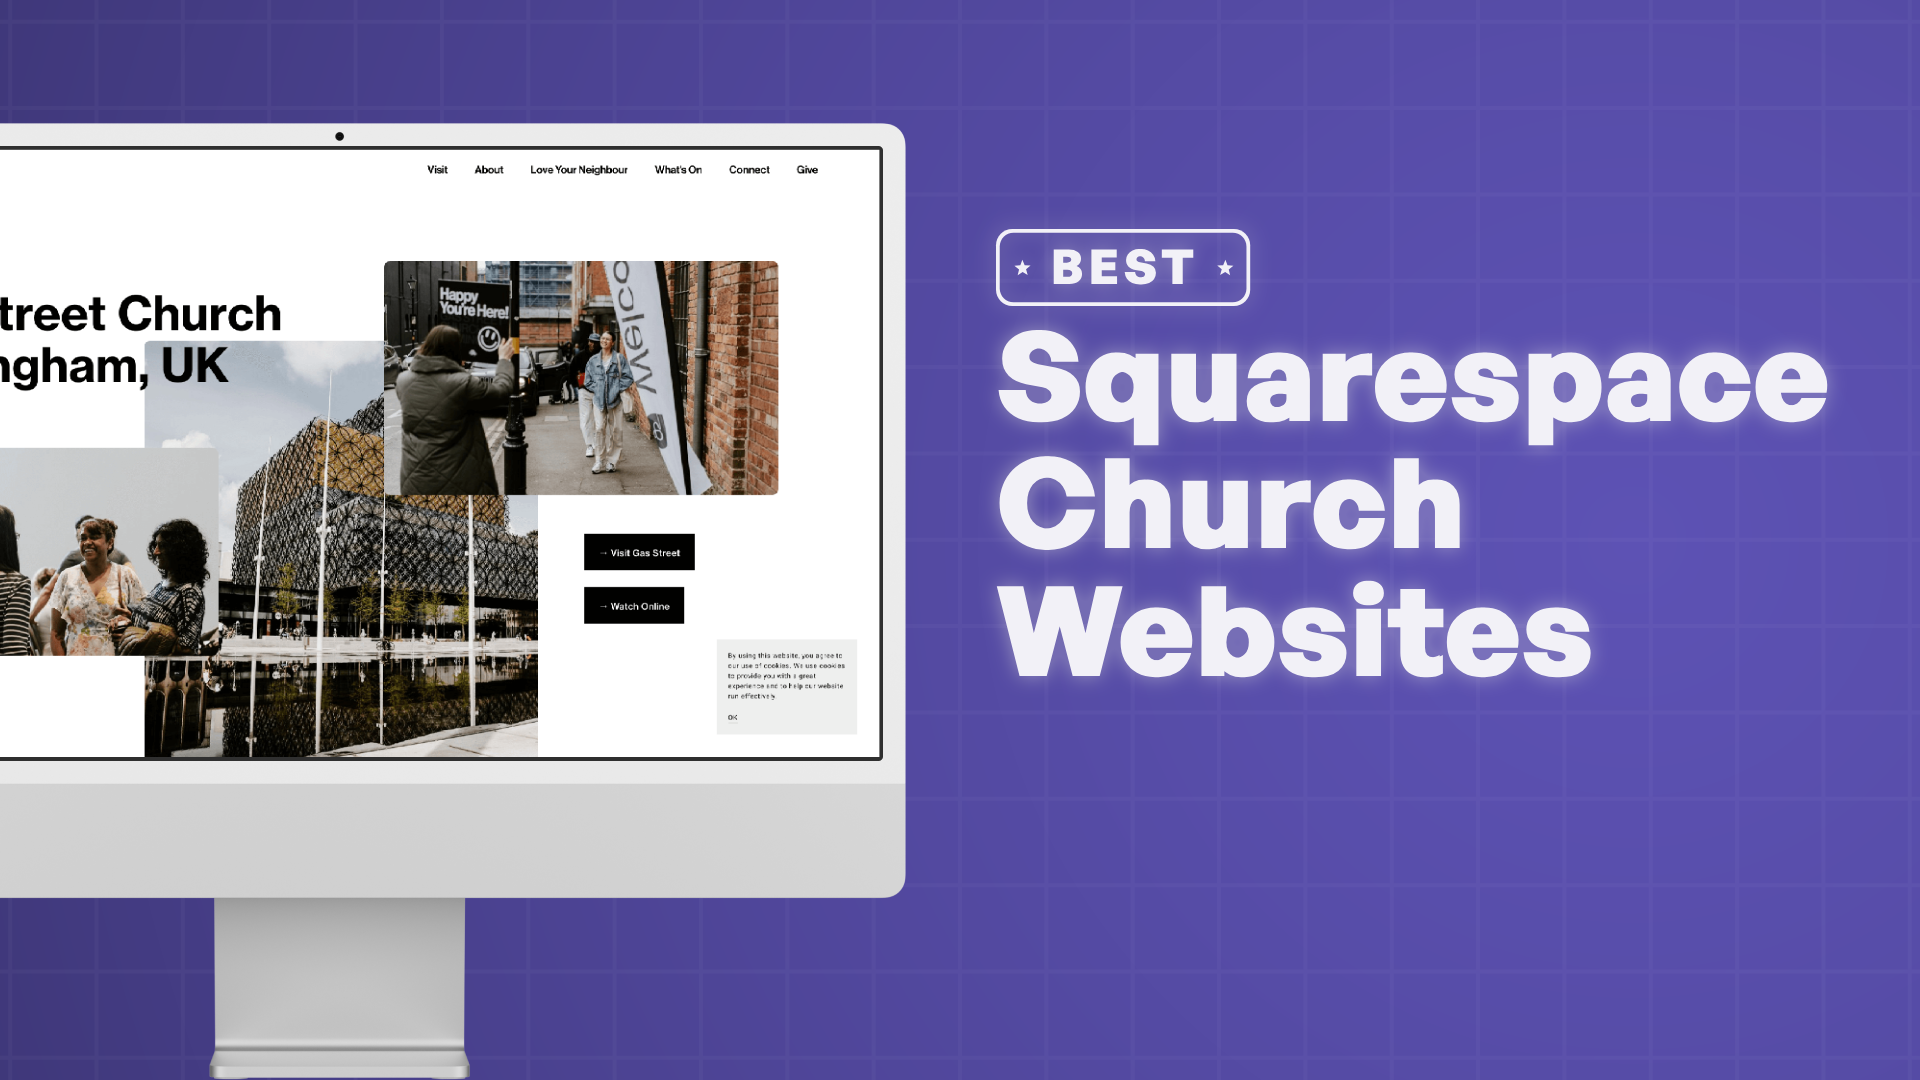 "Best Church Websites on Squarespace" with screenshots of the church websites on Squarespace